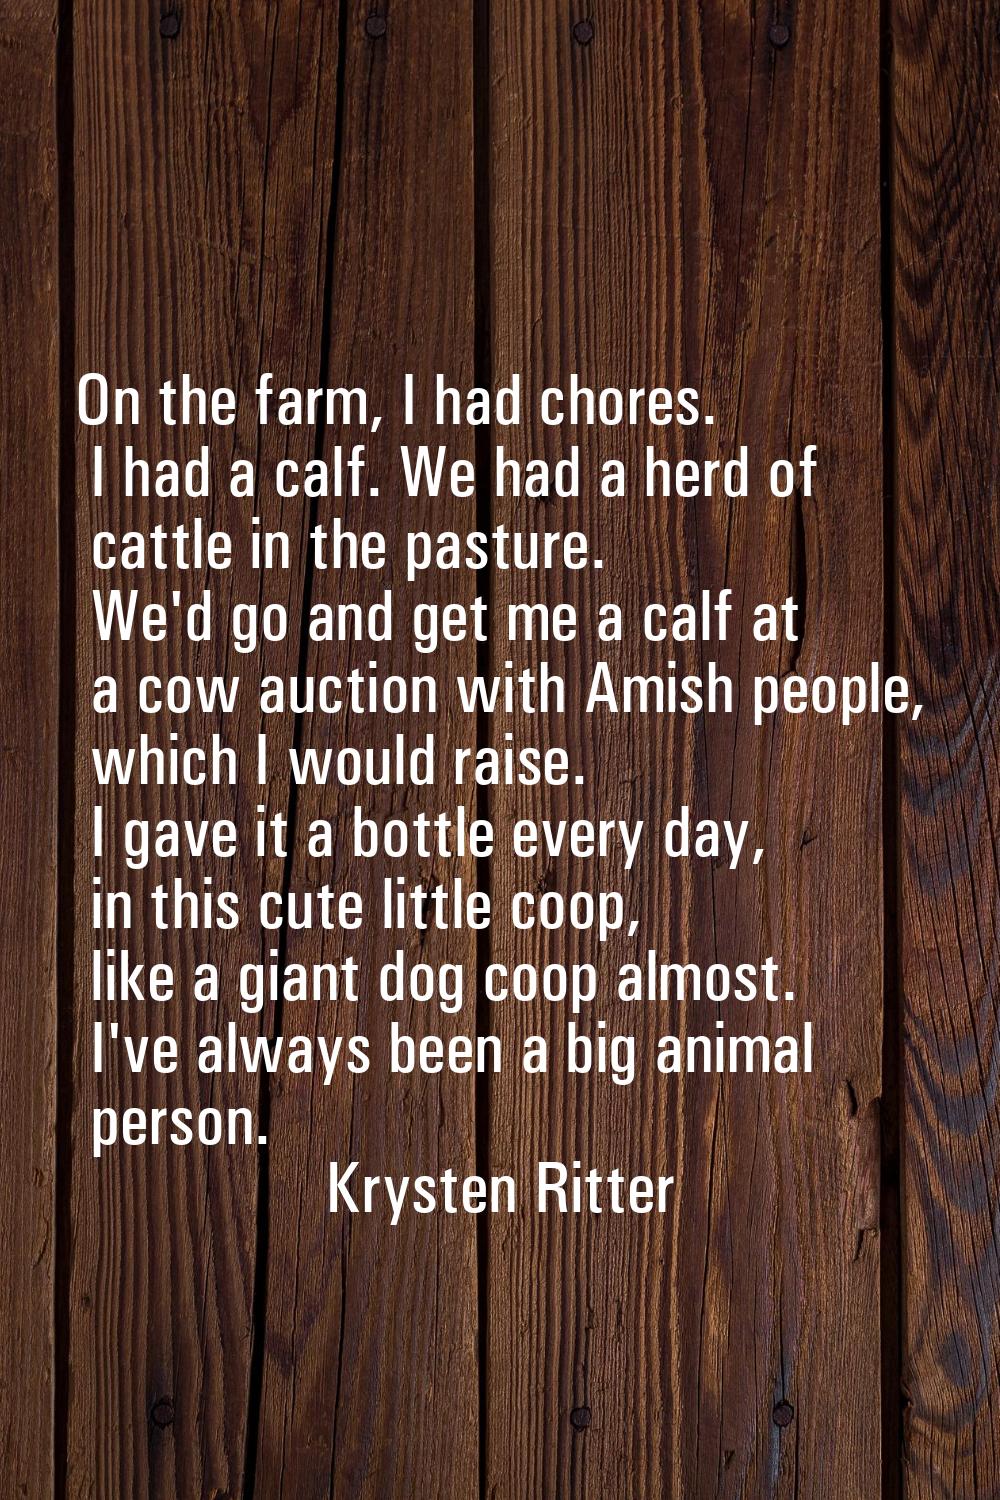 On the farm, I had chores. I had a calf. We had a herd of cattle in the pasture. We'd go and get me